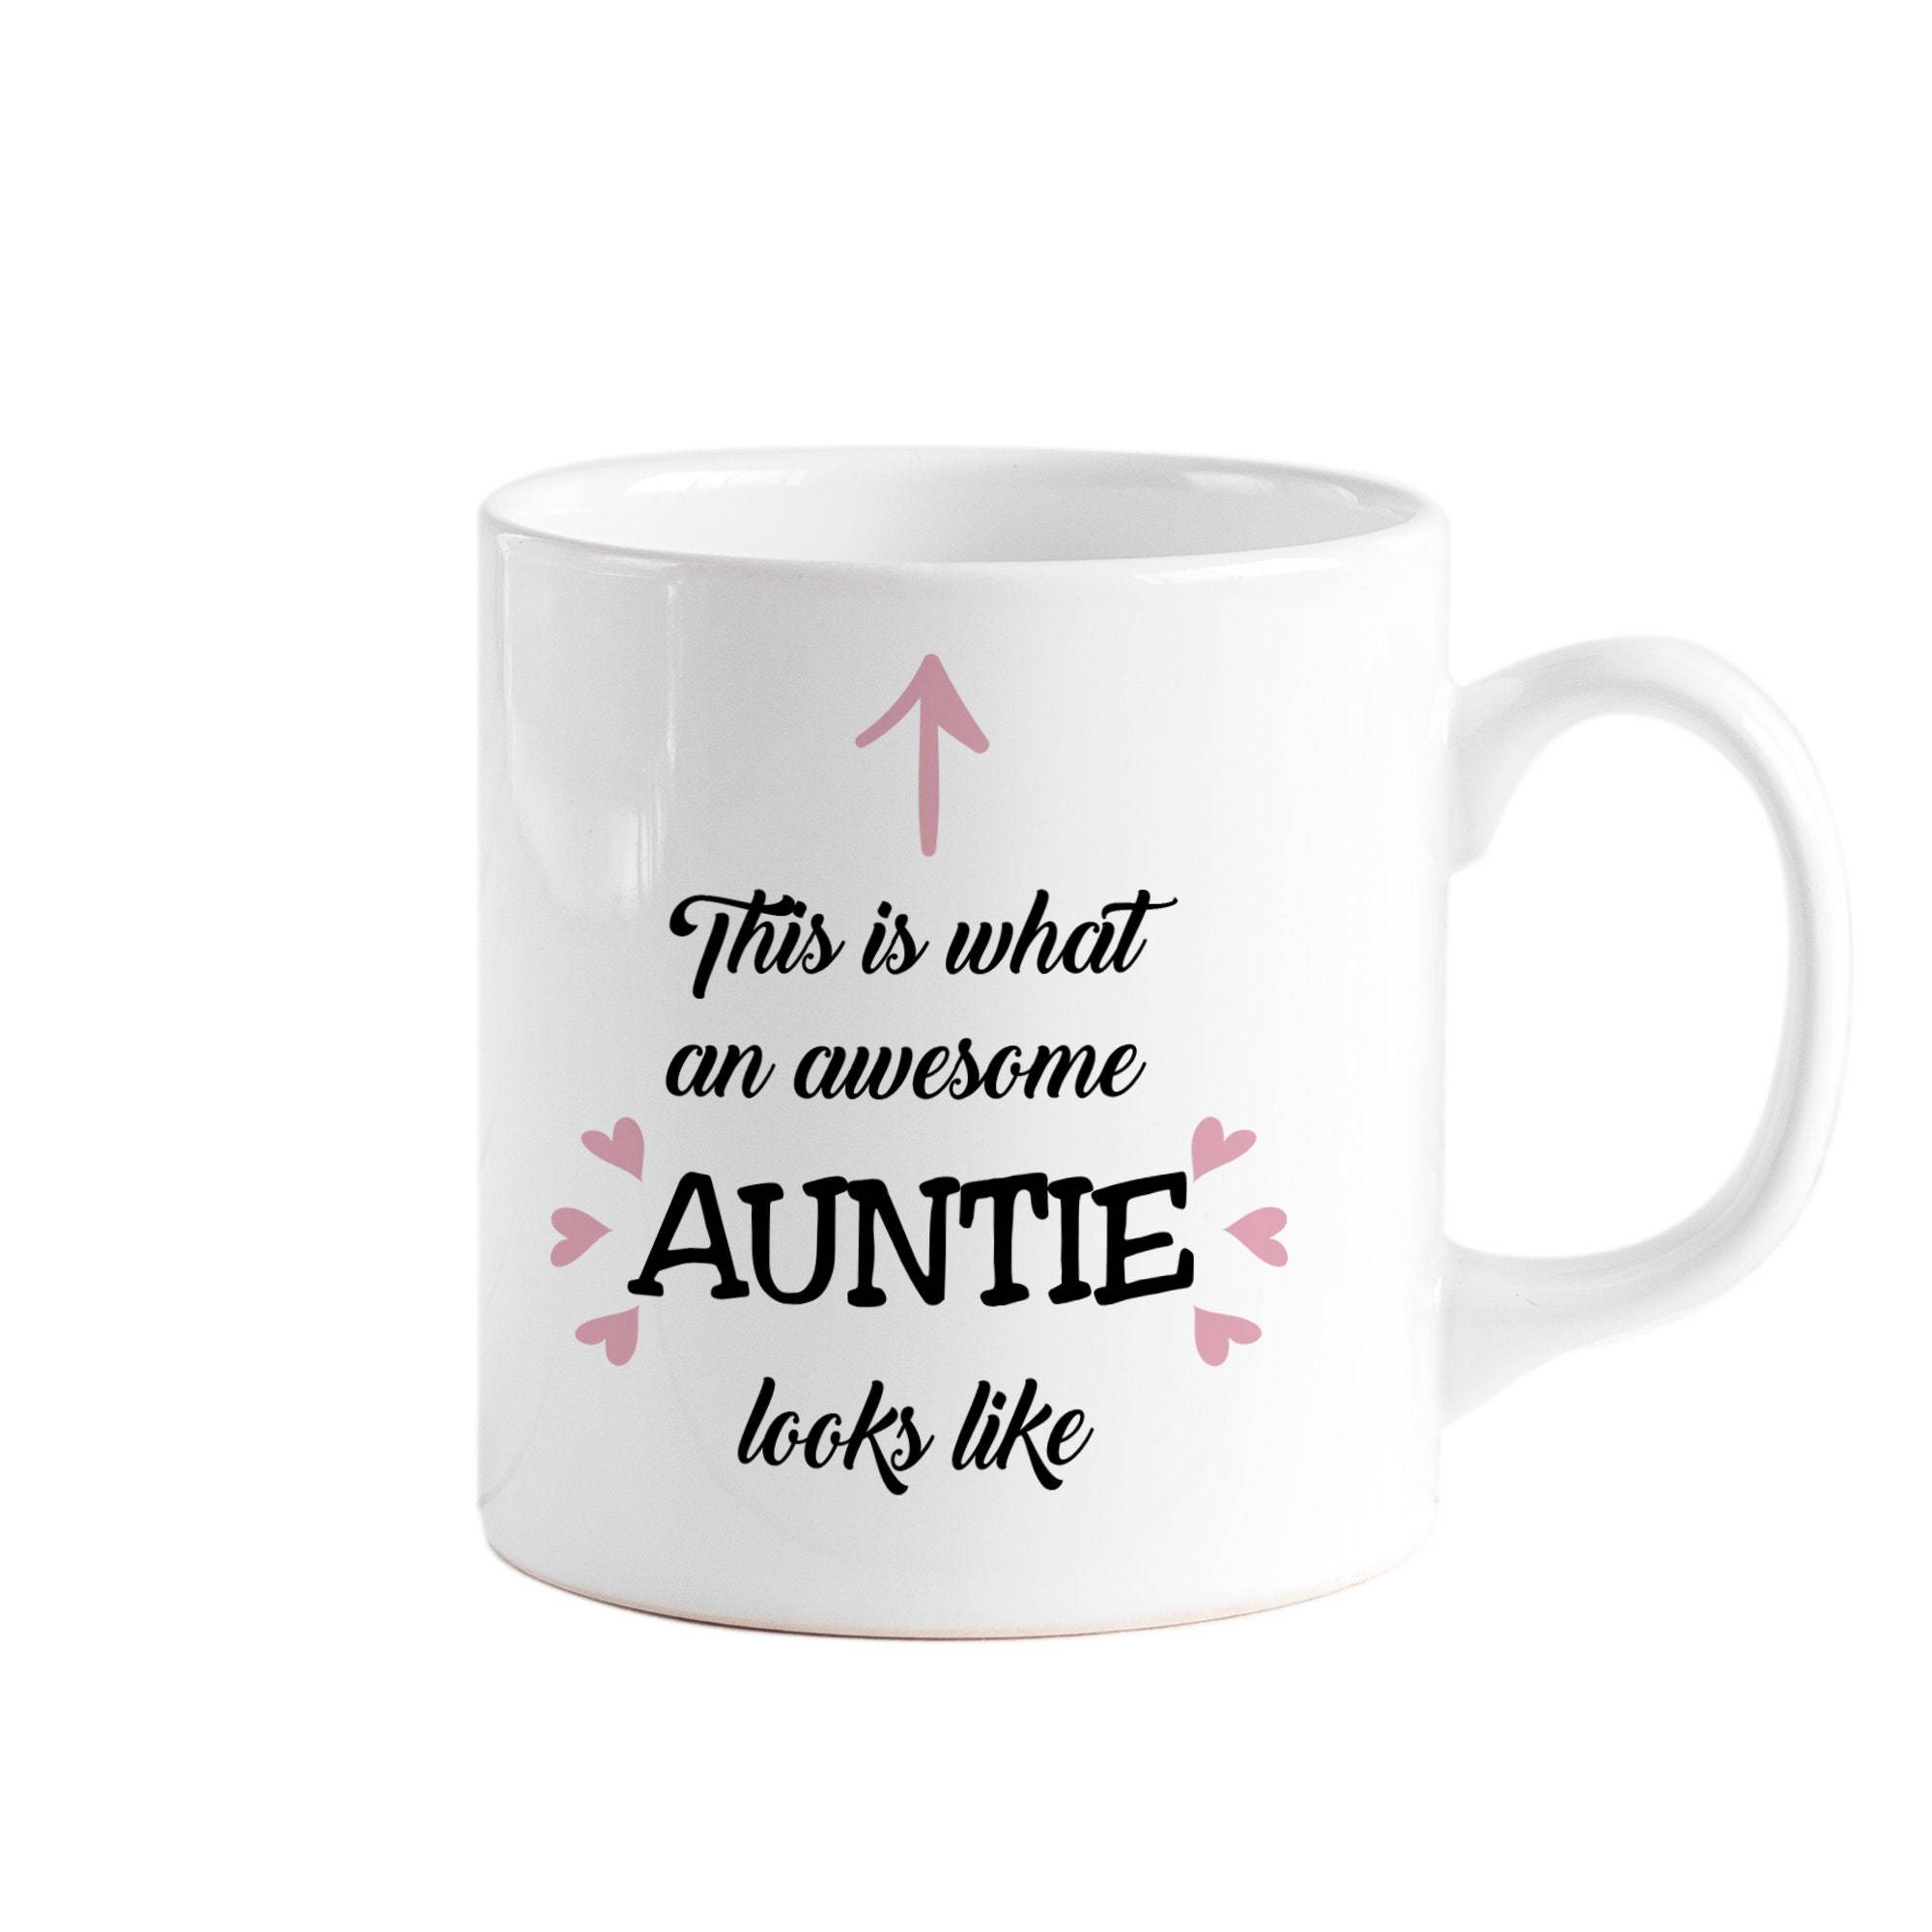 This is what an awesome auntie looks like mug, Mother's Day gift, Christmas gift